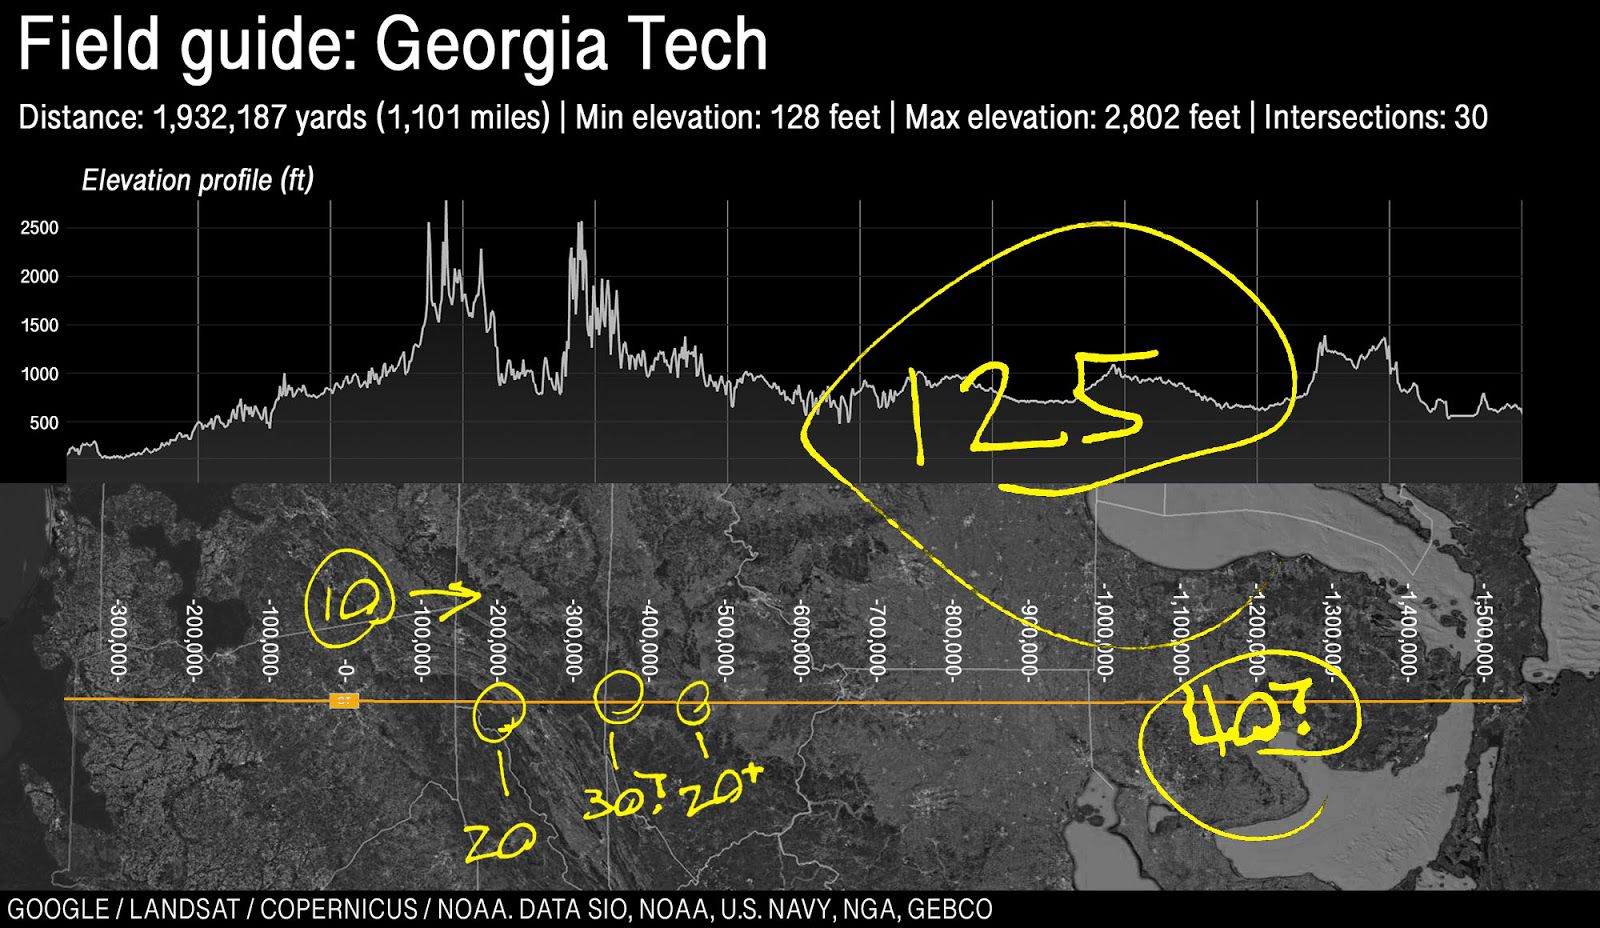 Above map and elevation profile, with notes detailing player locations.